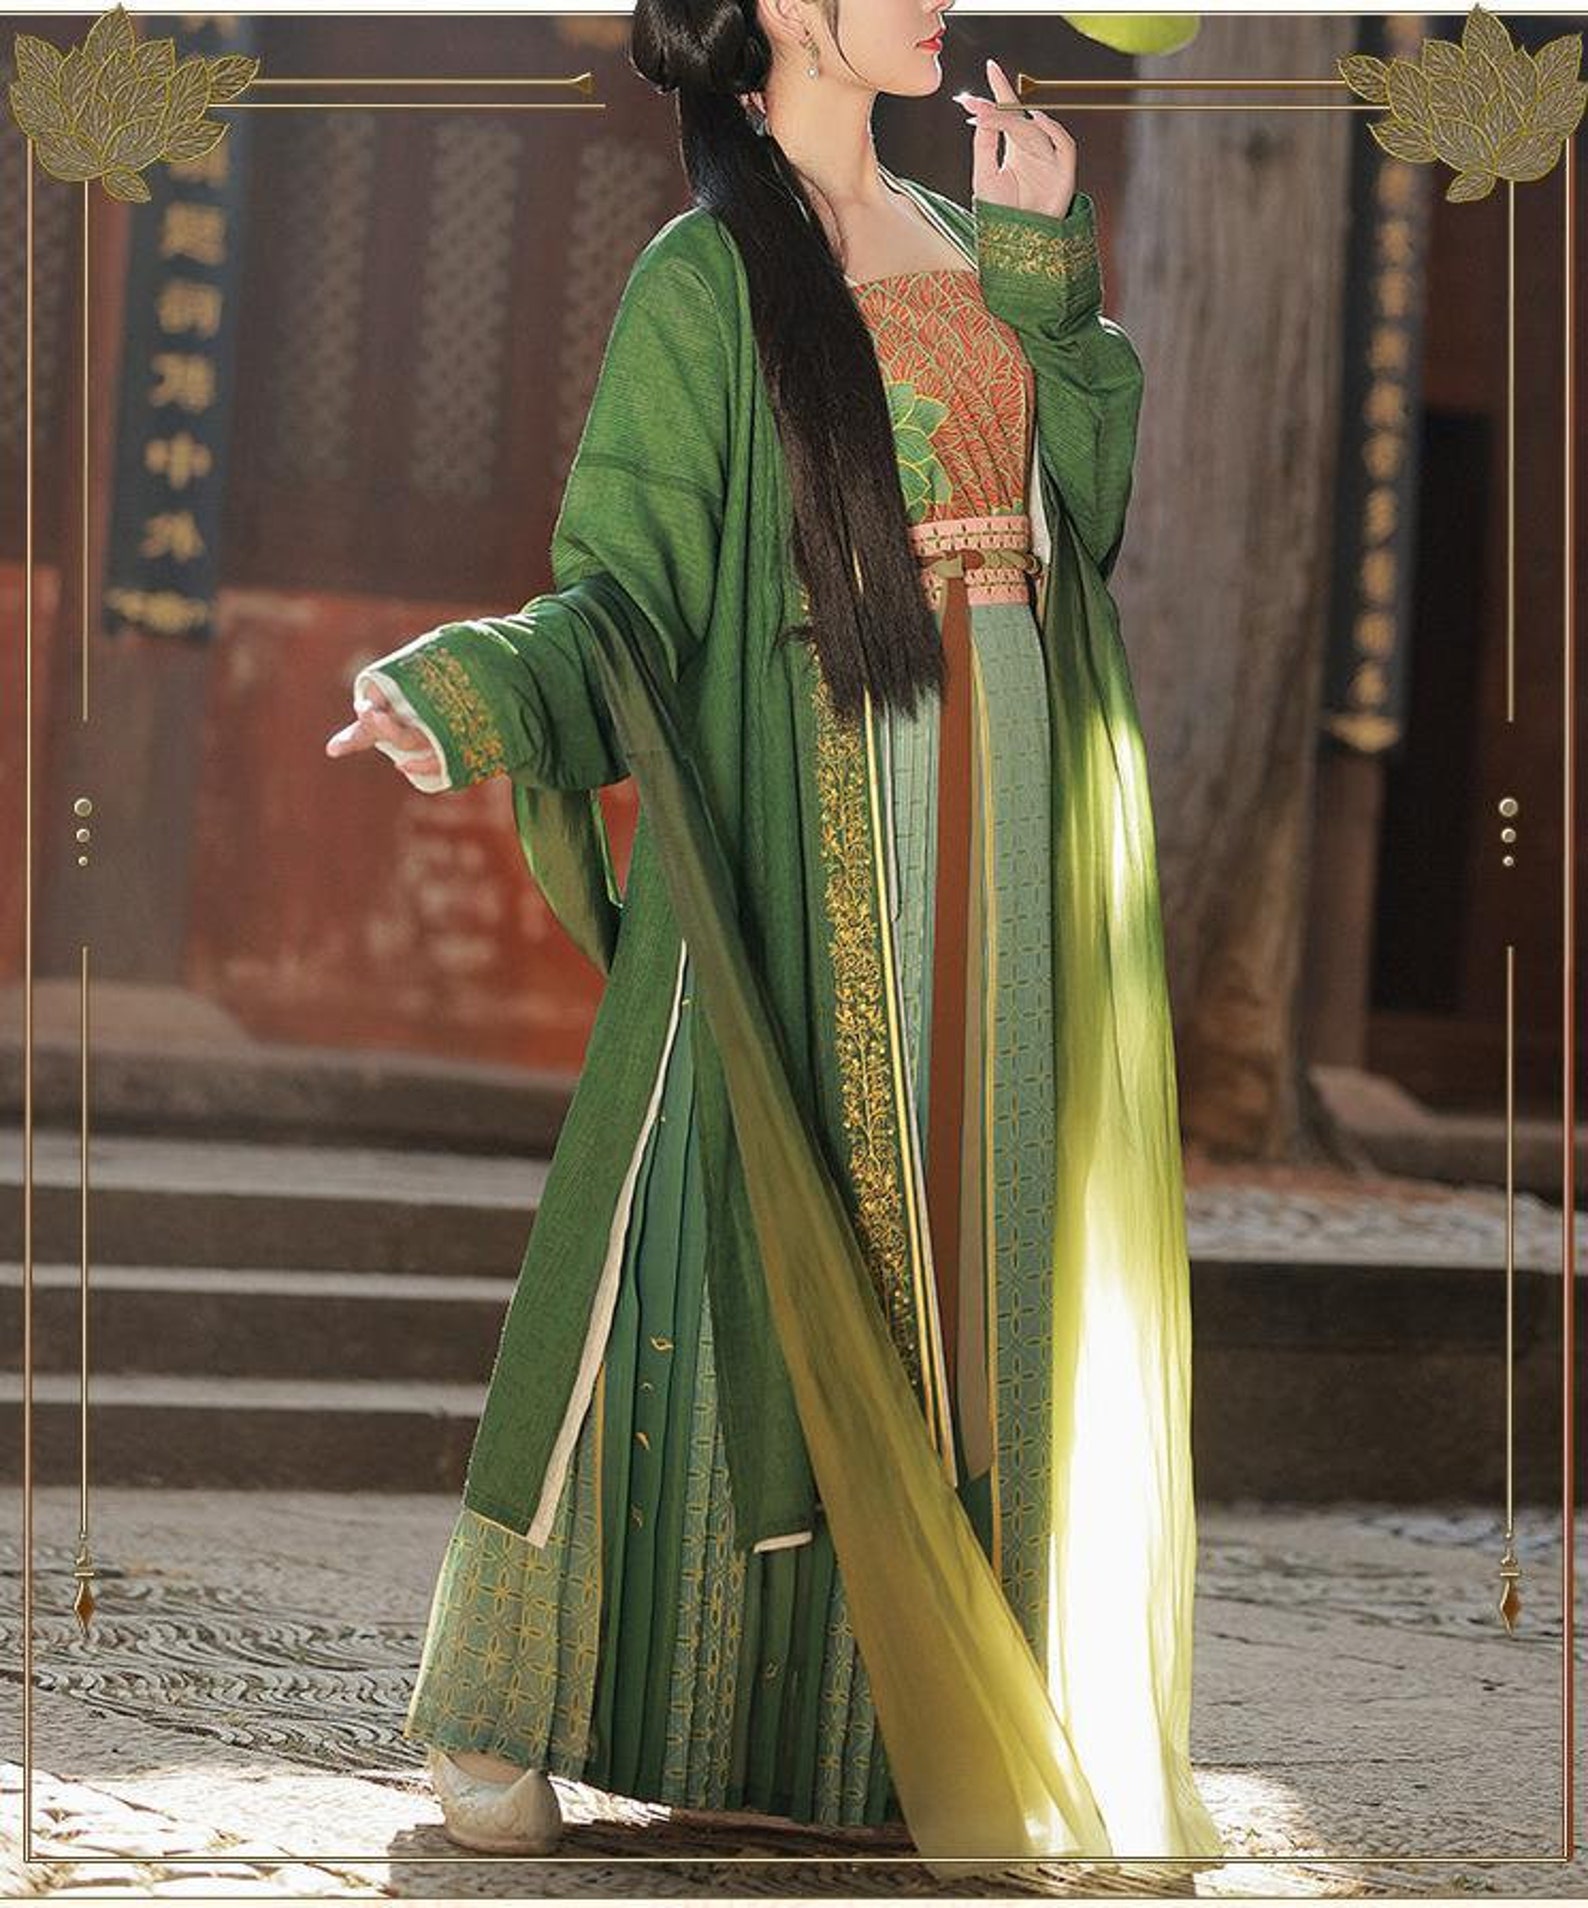 Green Song Dynasty Female Historical Clothing Chinese - Etsy